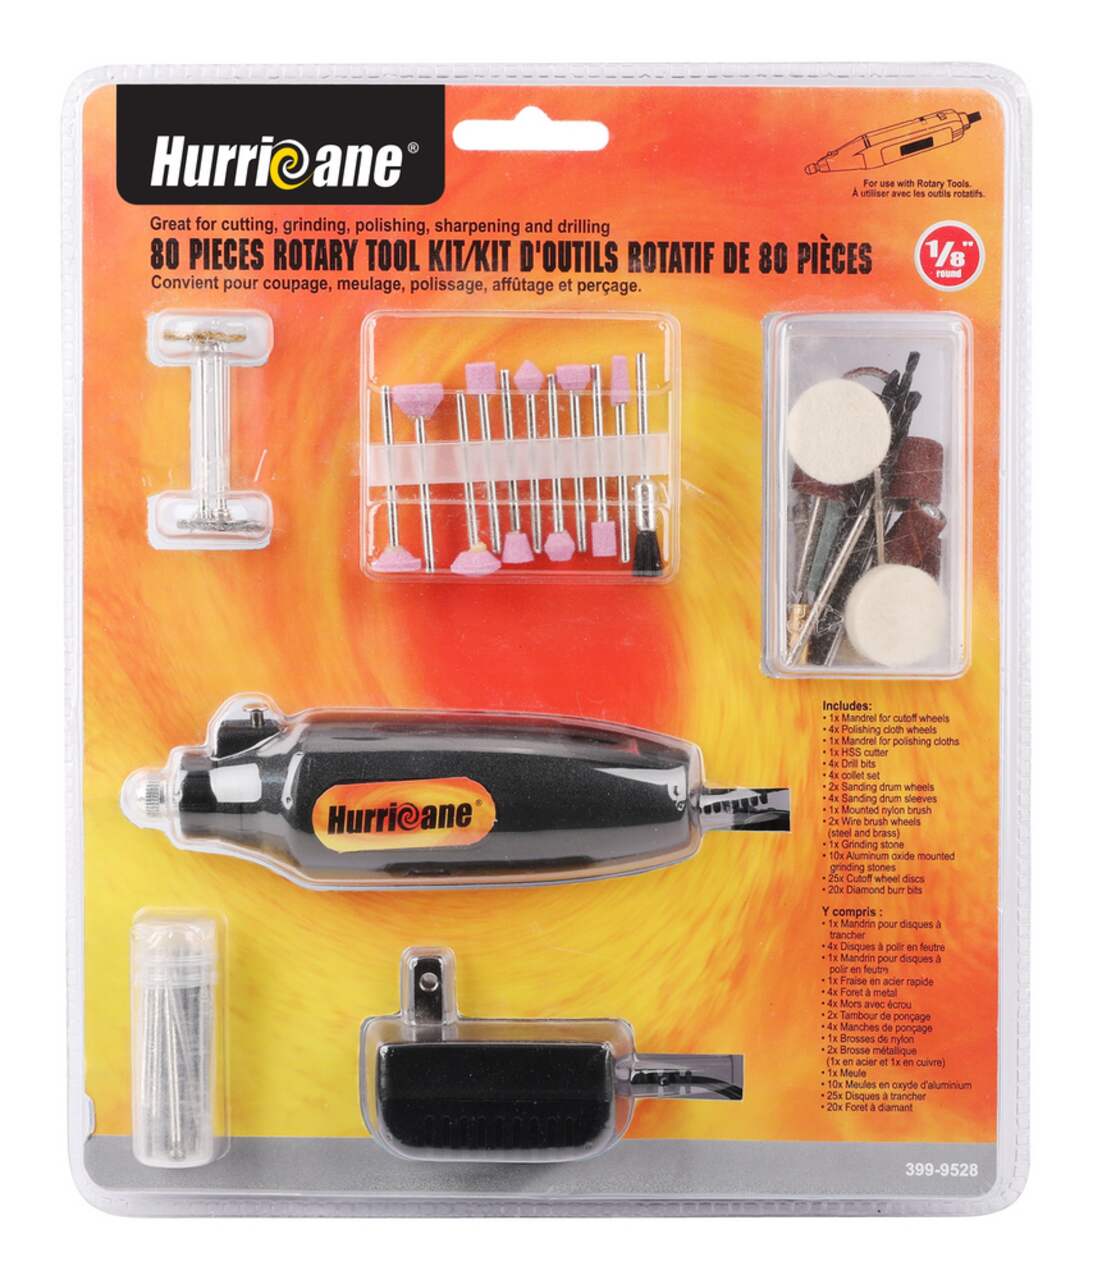 https://media-www.canadiantire.ca/product/fixing/tools/portable-power-tools/3999528/hurricane-80pc-rotary-tool-kit-c79a309a-bb9b-4f36-b8ad-67af214a270b.png?imdensity=1&imwidth=1244&impolicy=mZoom